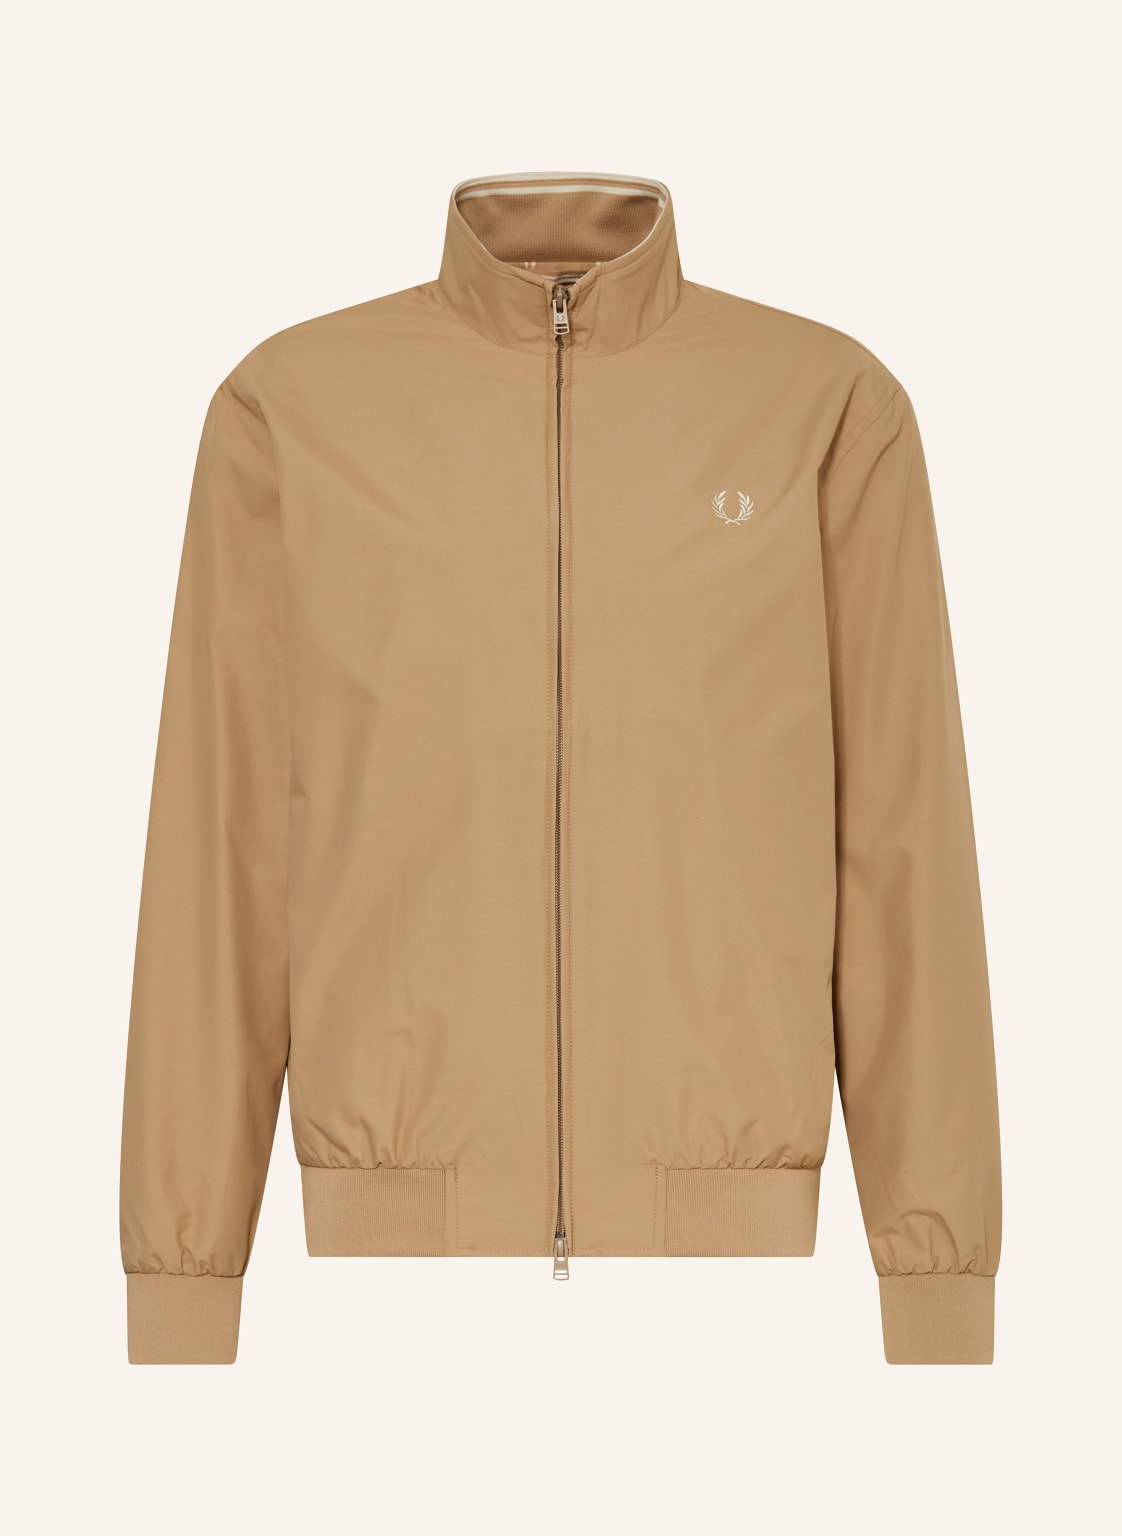 Fred Perry Jacke Brentham braun von Fred Perry